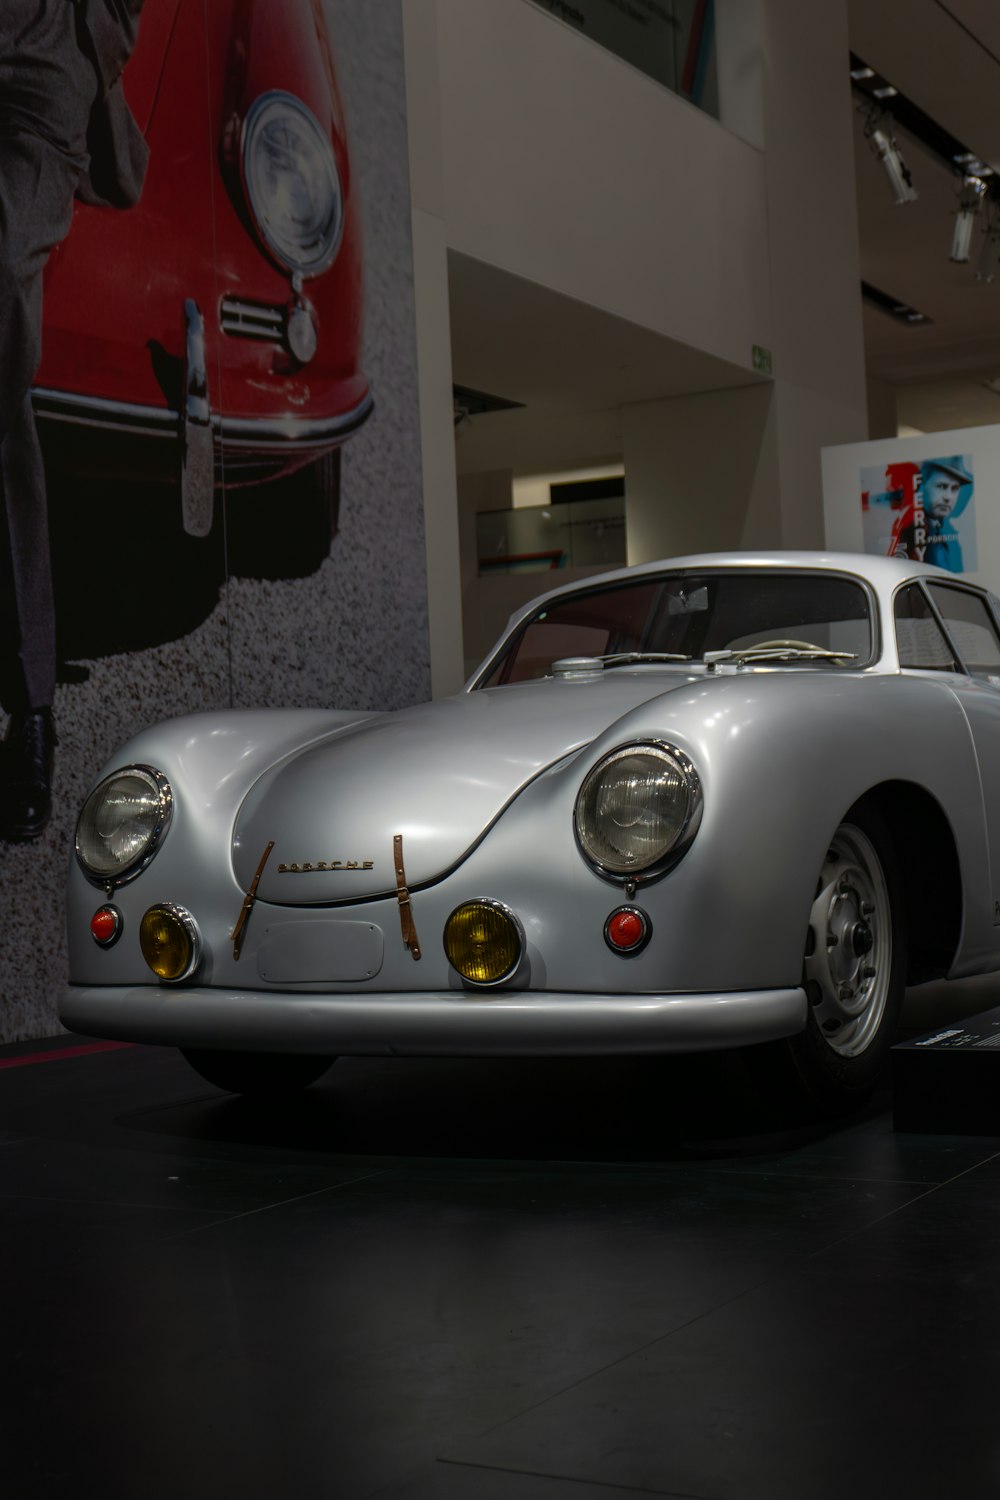 a silver sports car on display in a museum